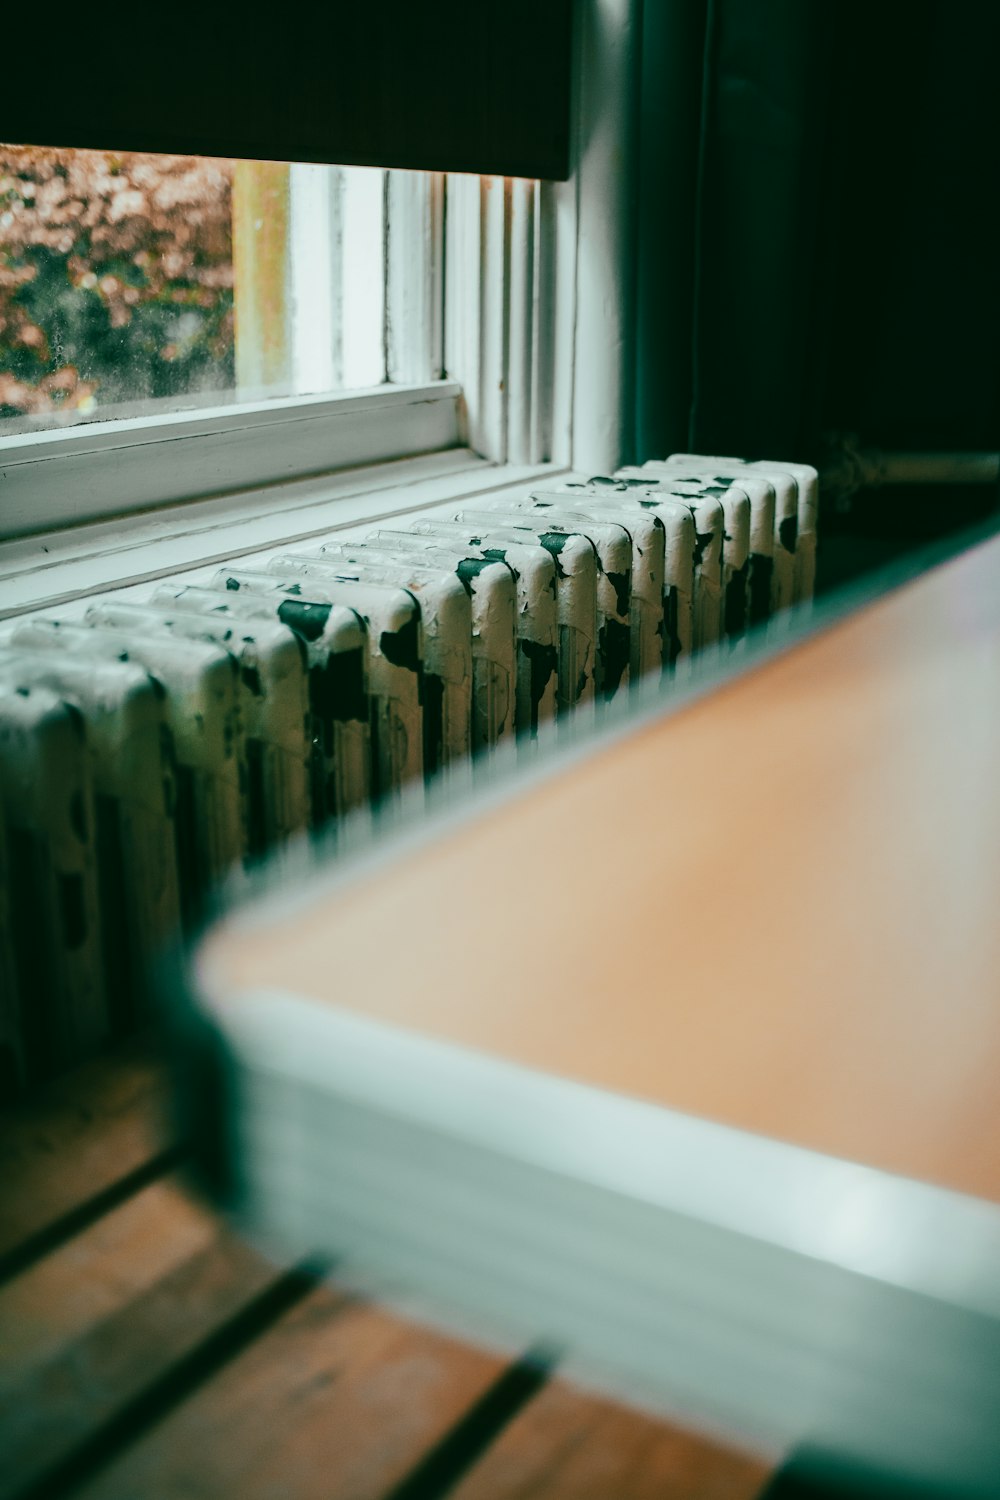 a close up of a radiator in front of a window